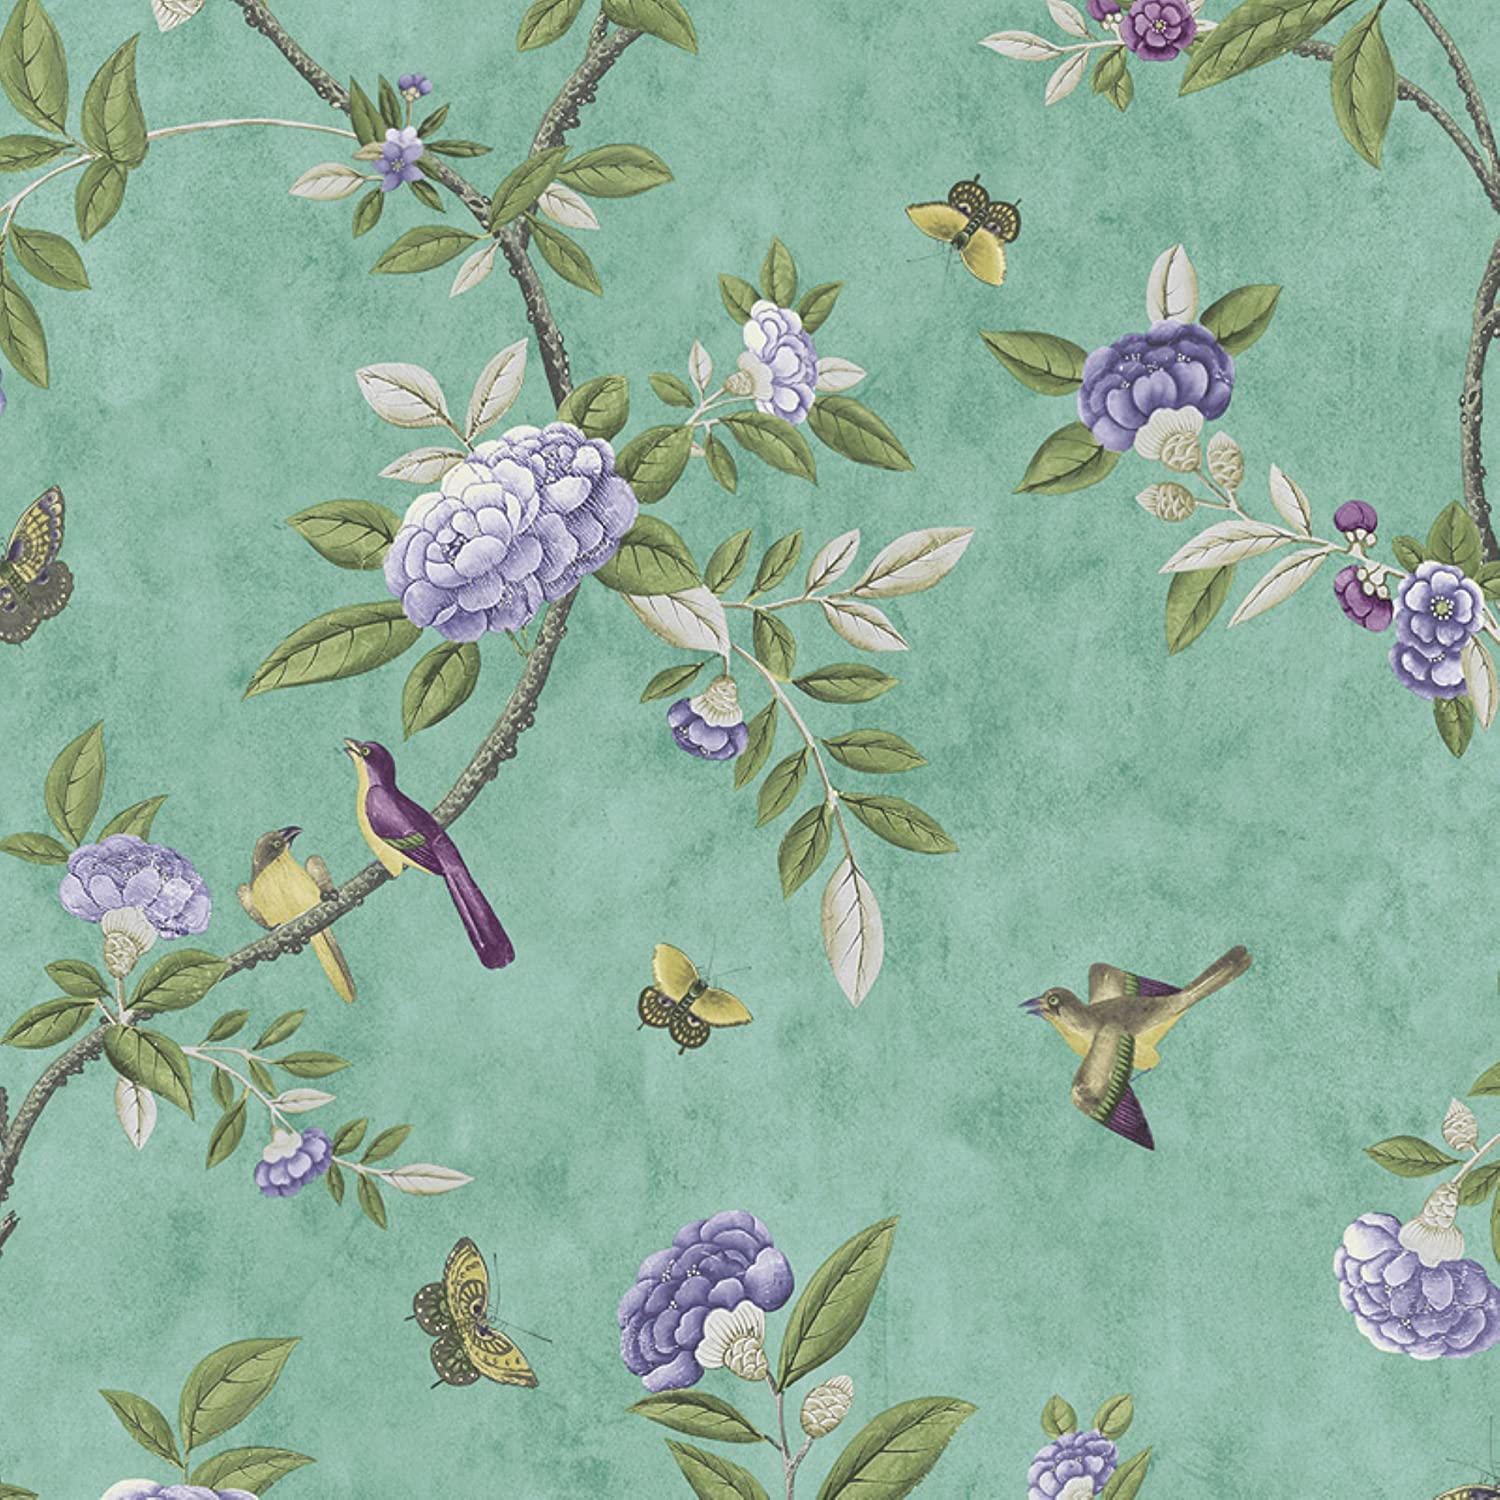 Graham & Brown Chinoiserie Vintage Birds Floral Jade Wallpaper Was £23 Now £5: Amazon.co.uk: DIY & Tools